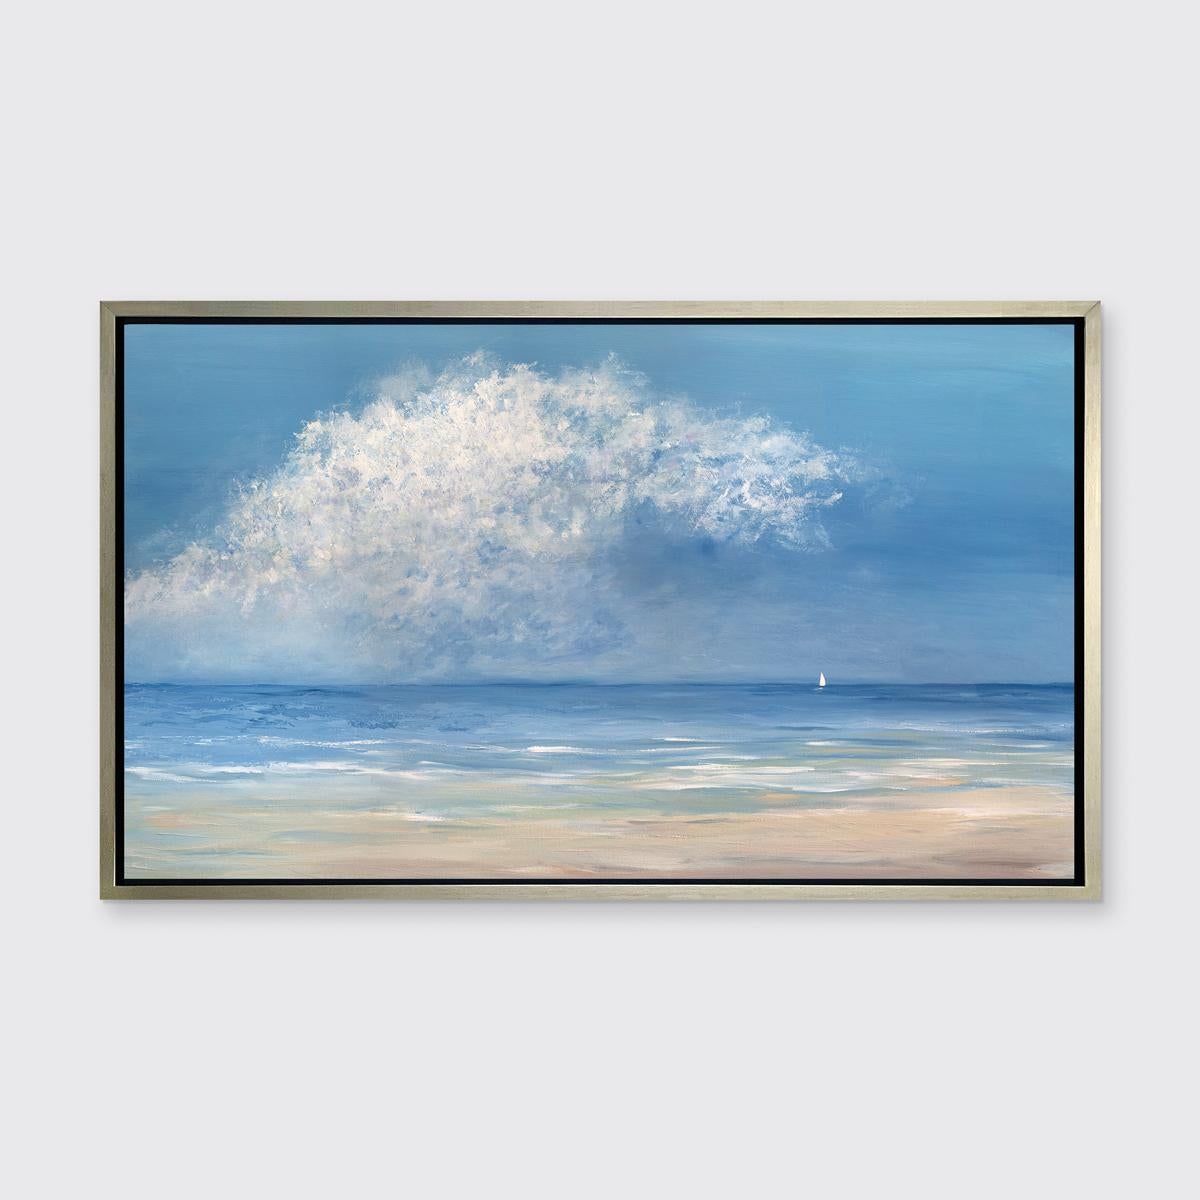 S. Cora Aldo Landscape Print - "On the Wind, " Framed Limited Edition Giclee Print, 48" x 80"